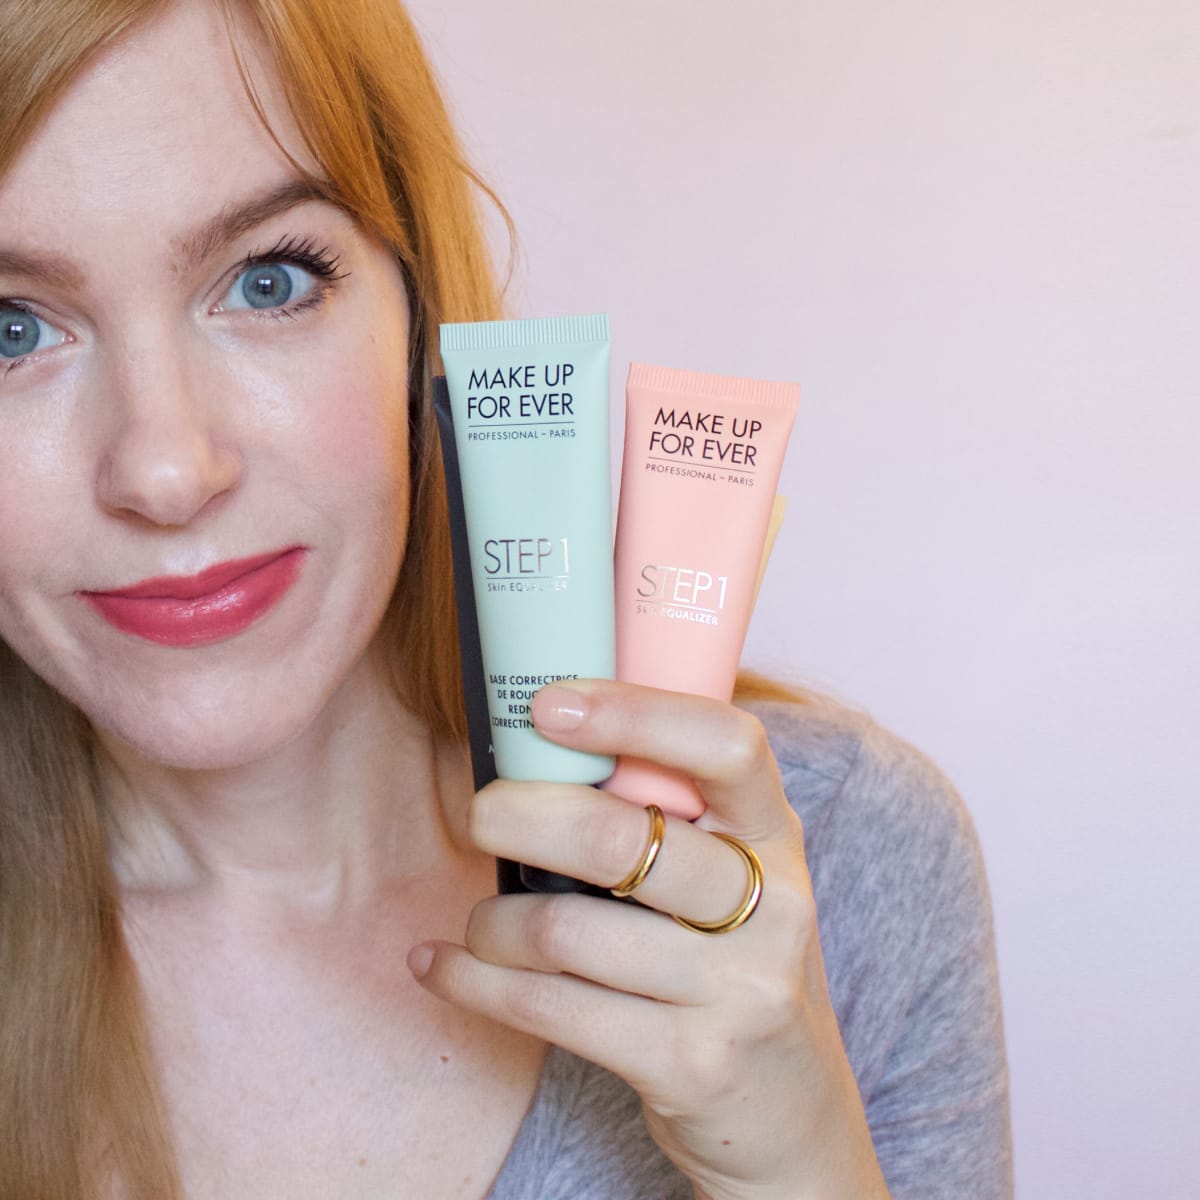 Make Up For Ever Primer Review - The Styling Edit